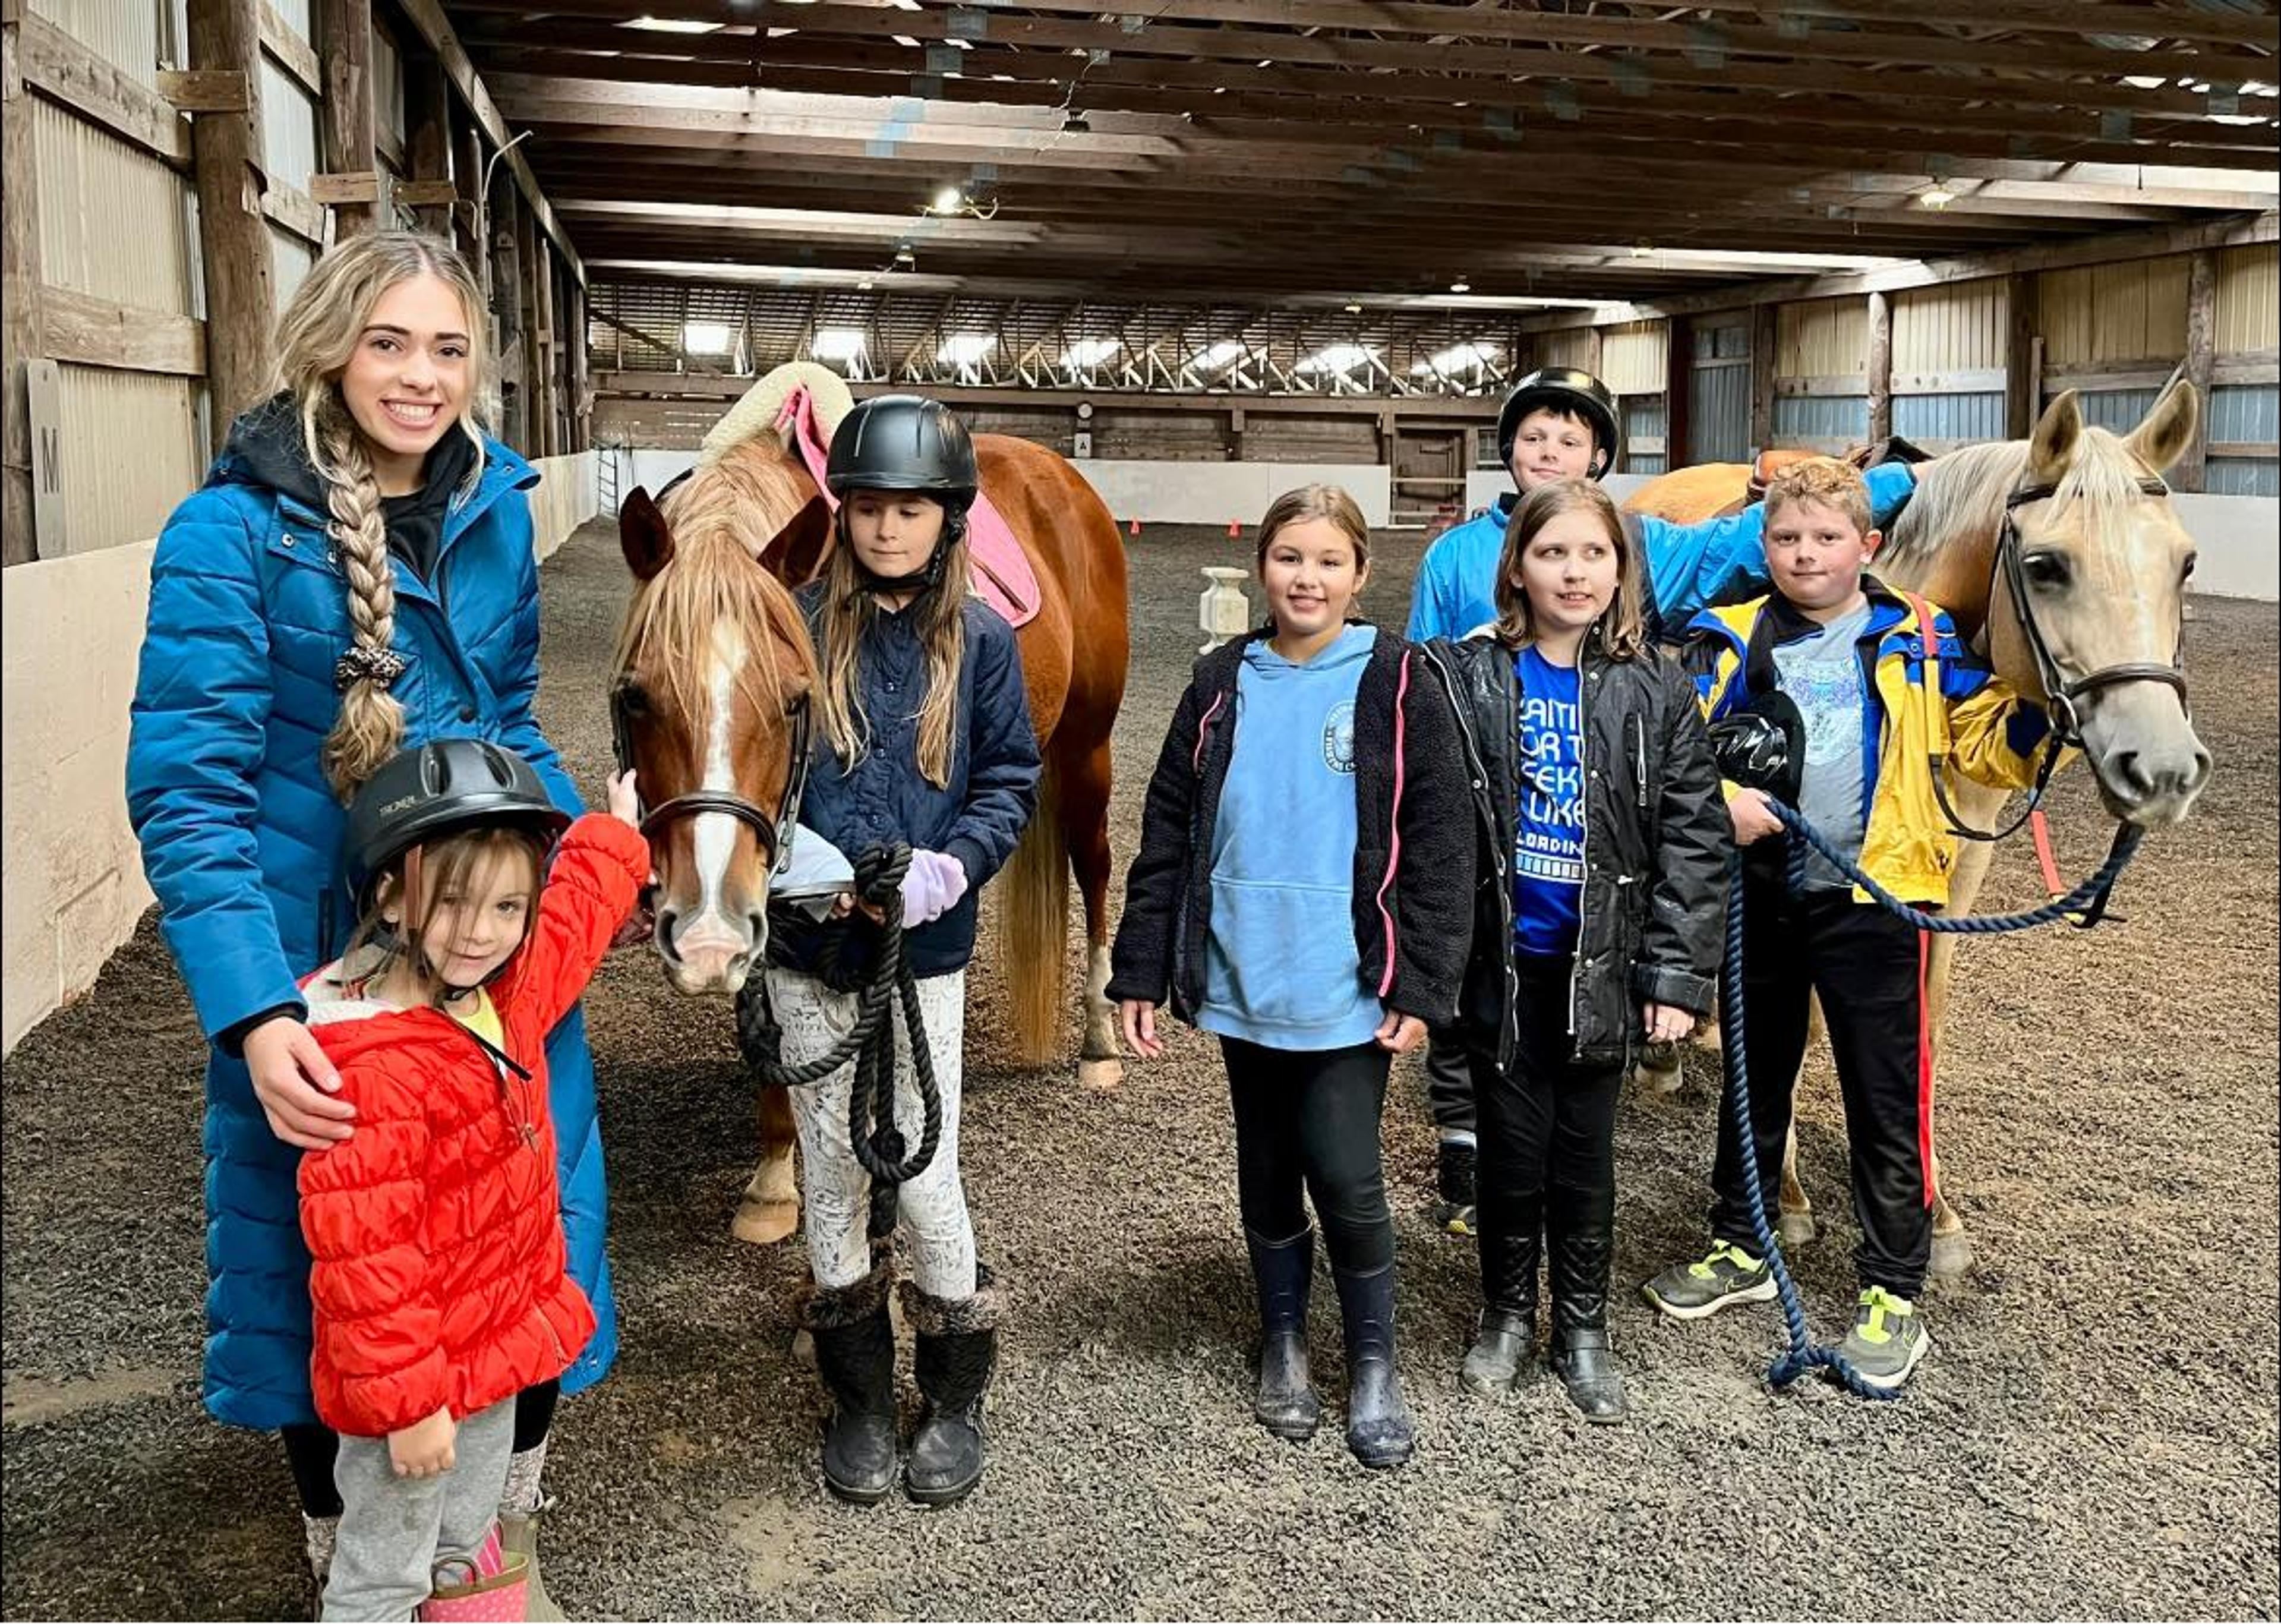 PA Cyber students at a horse riding event